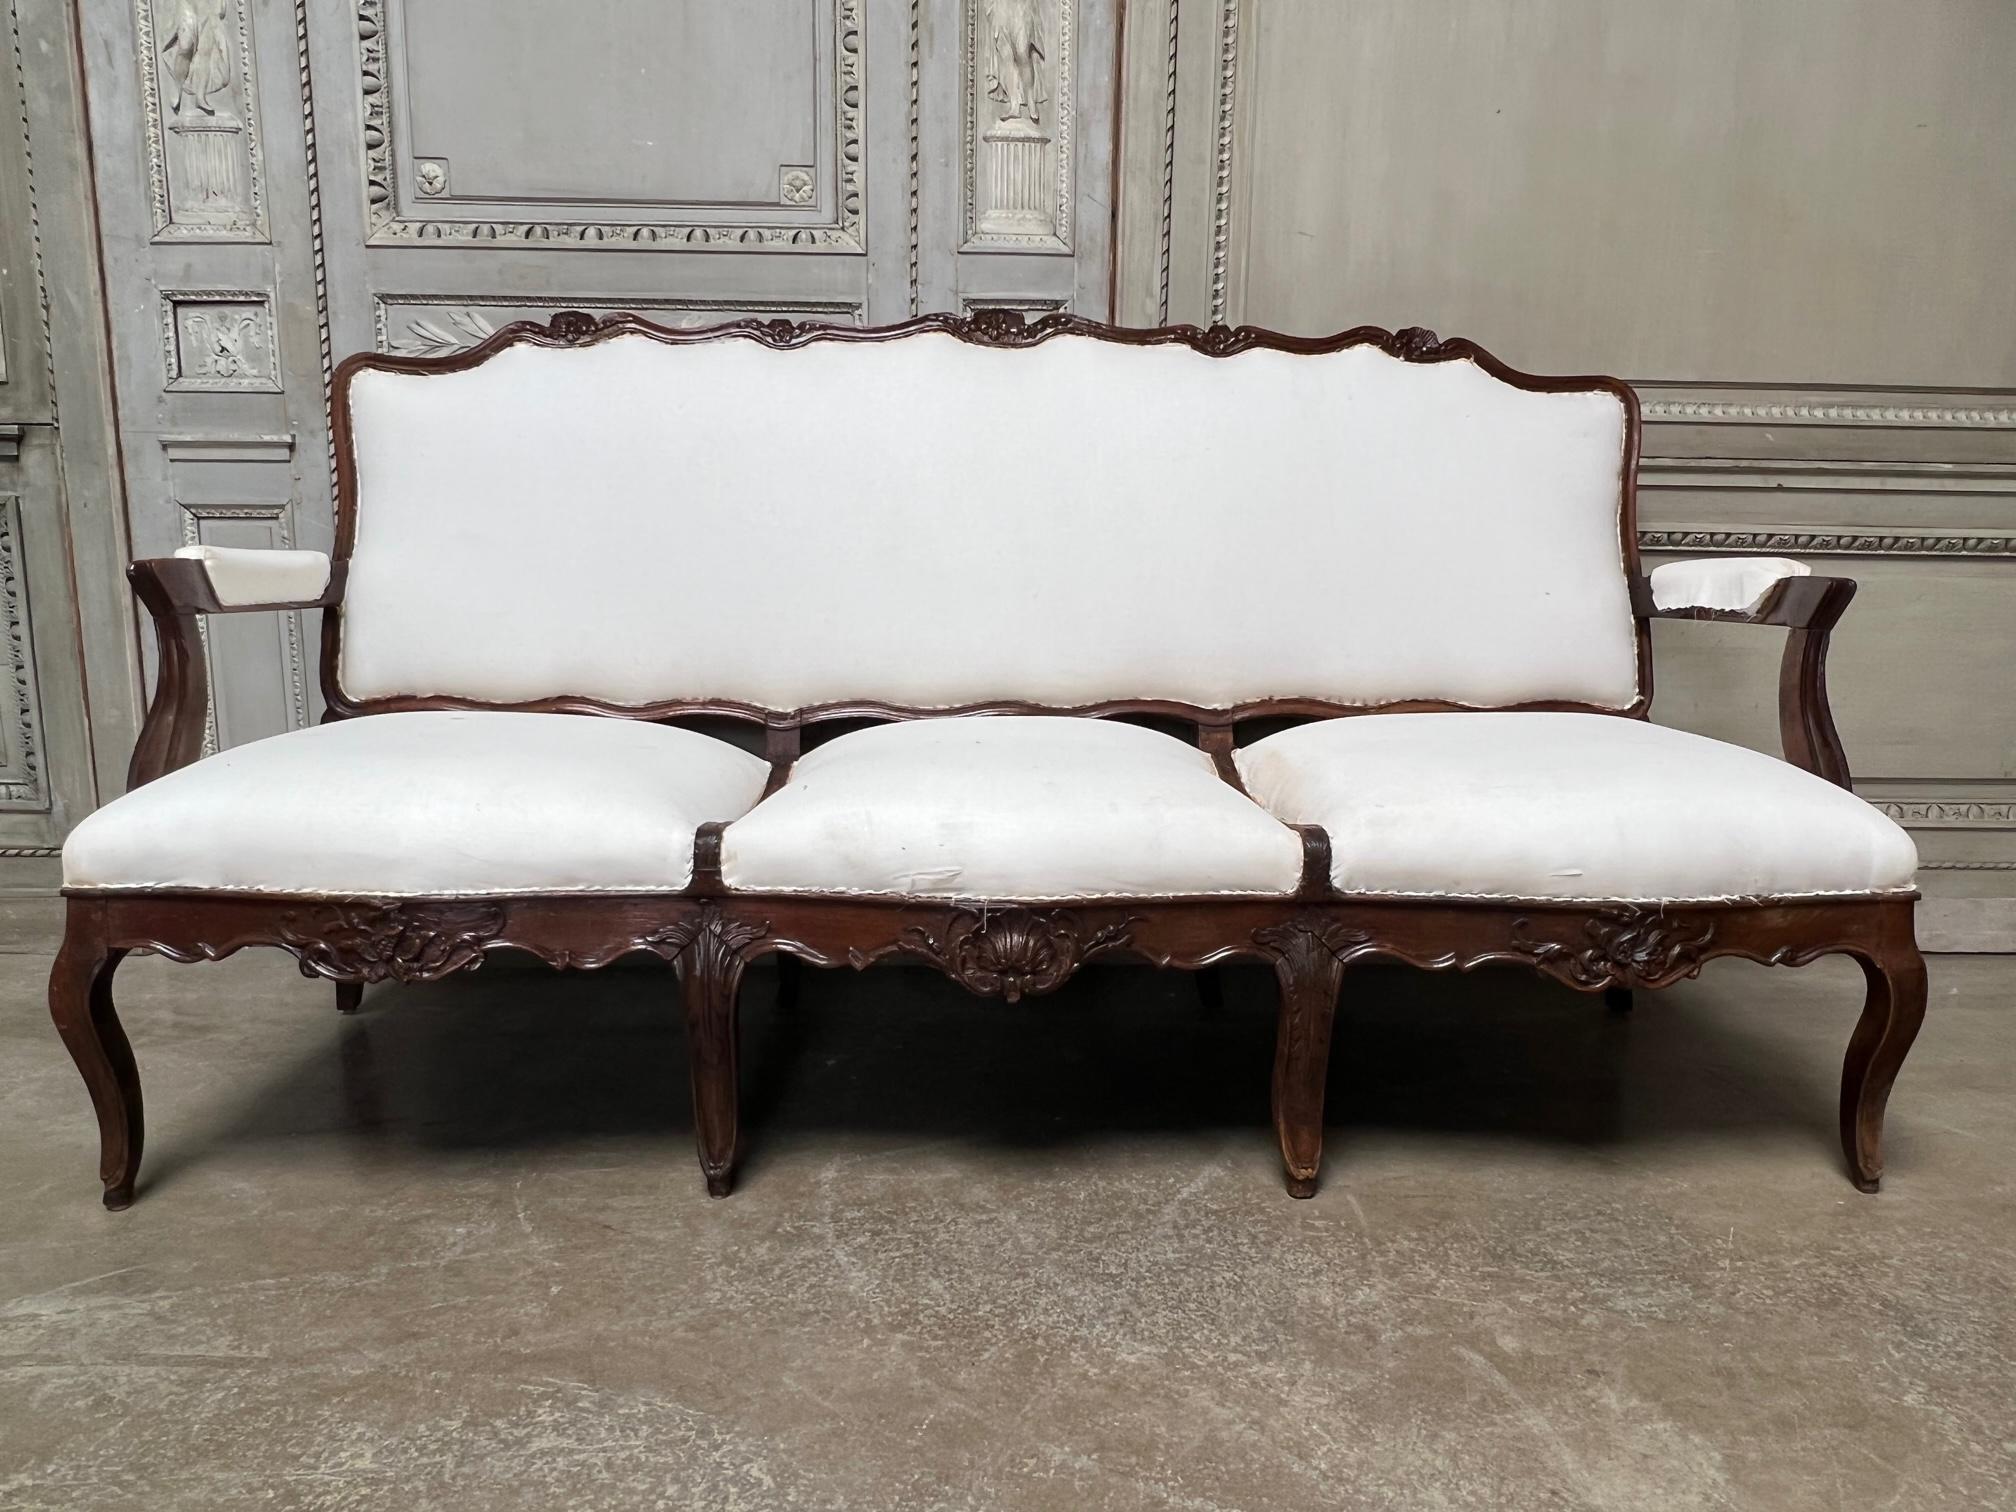 A large French Regence carved walnut canape, sofa with cabriole legs and carved shell andnfoliage. This sofa is in a late Regence period with hints of Louis XV style assymetry This unusual sofa has carved walnut separating the seat into three